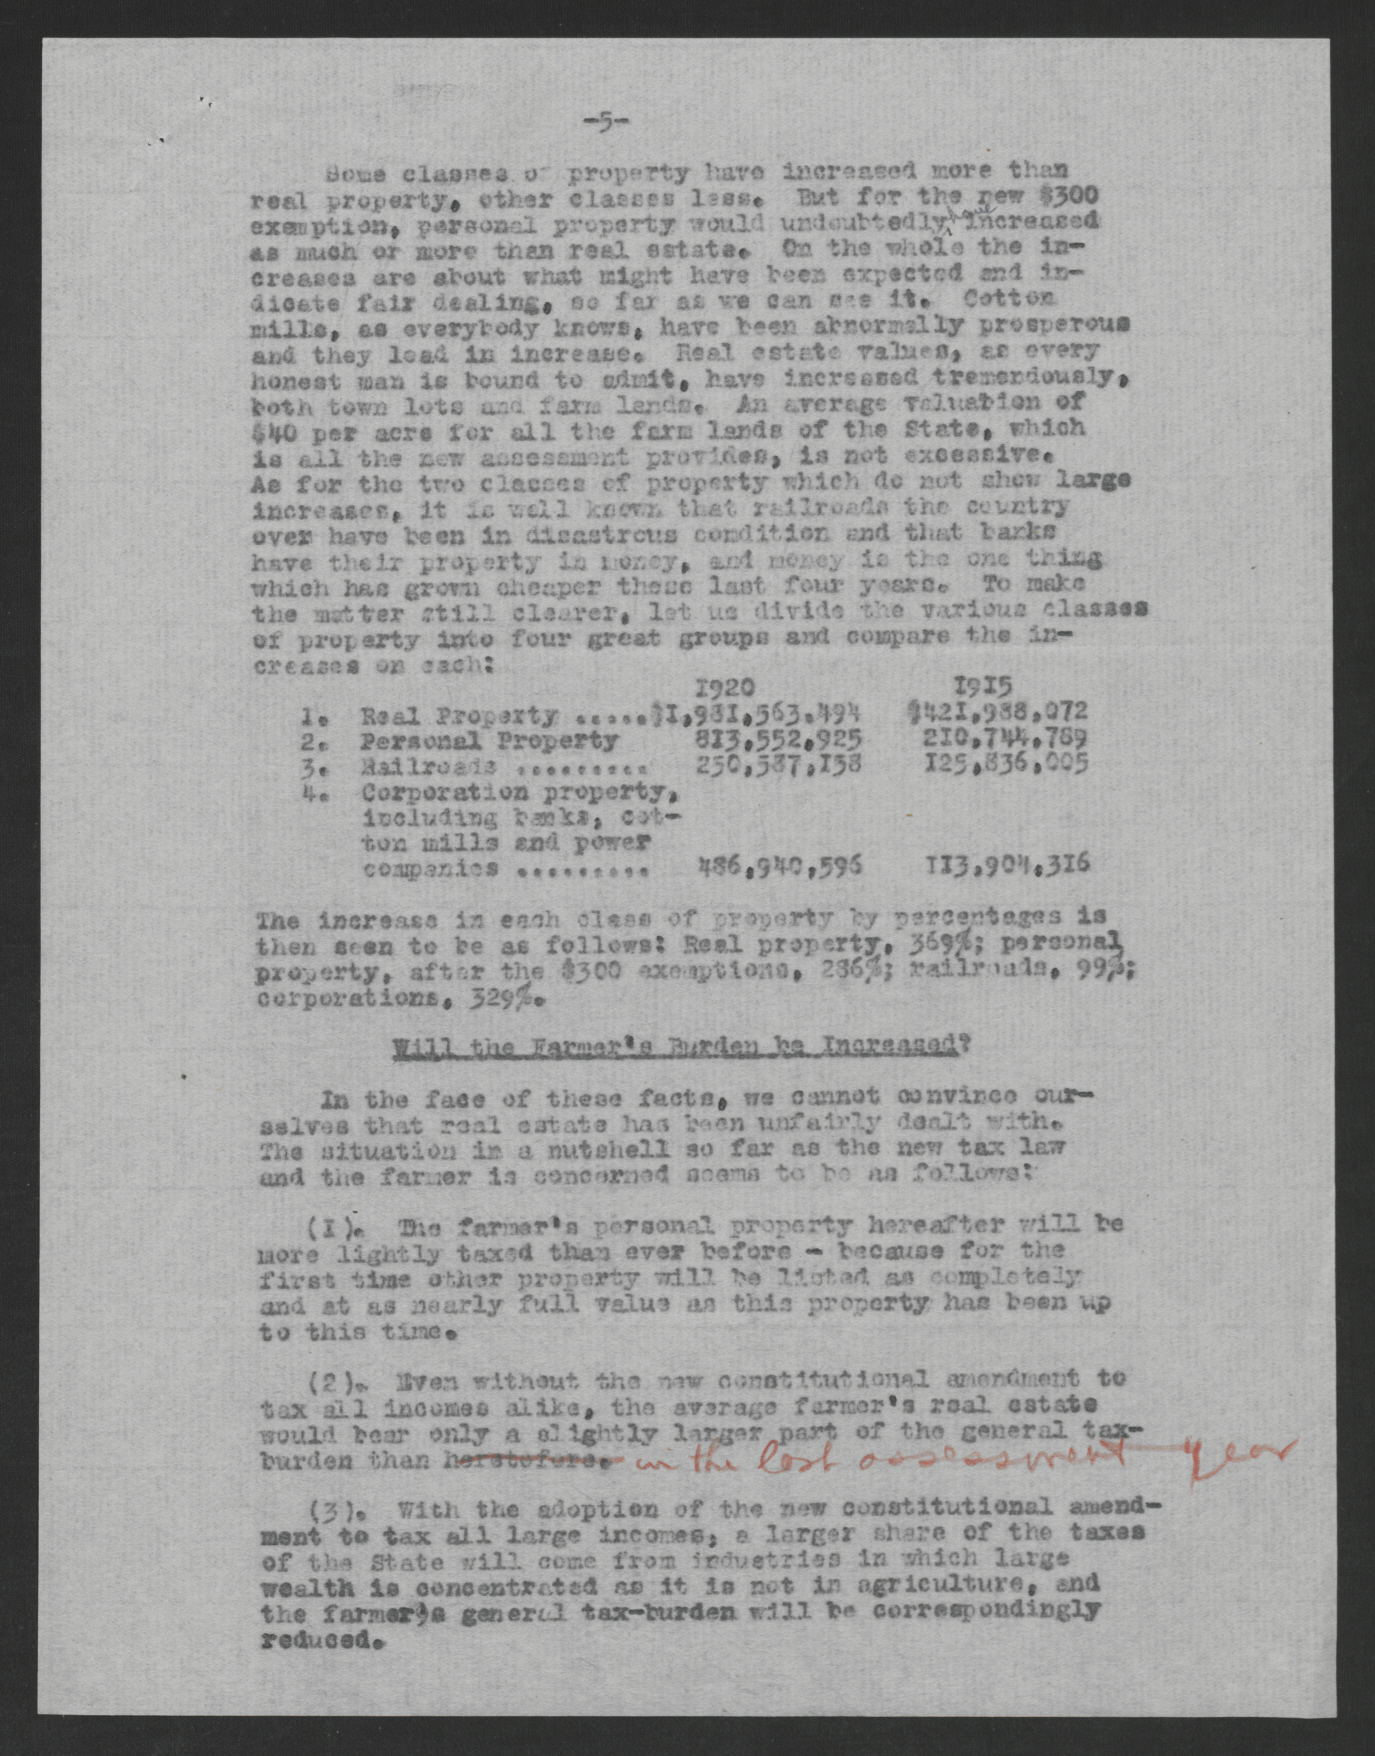 Report of the Legislative Committee of the North Carolina State Board of Agriculture, August 18, 1920, page 5